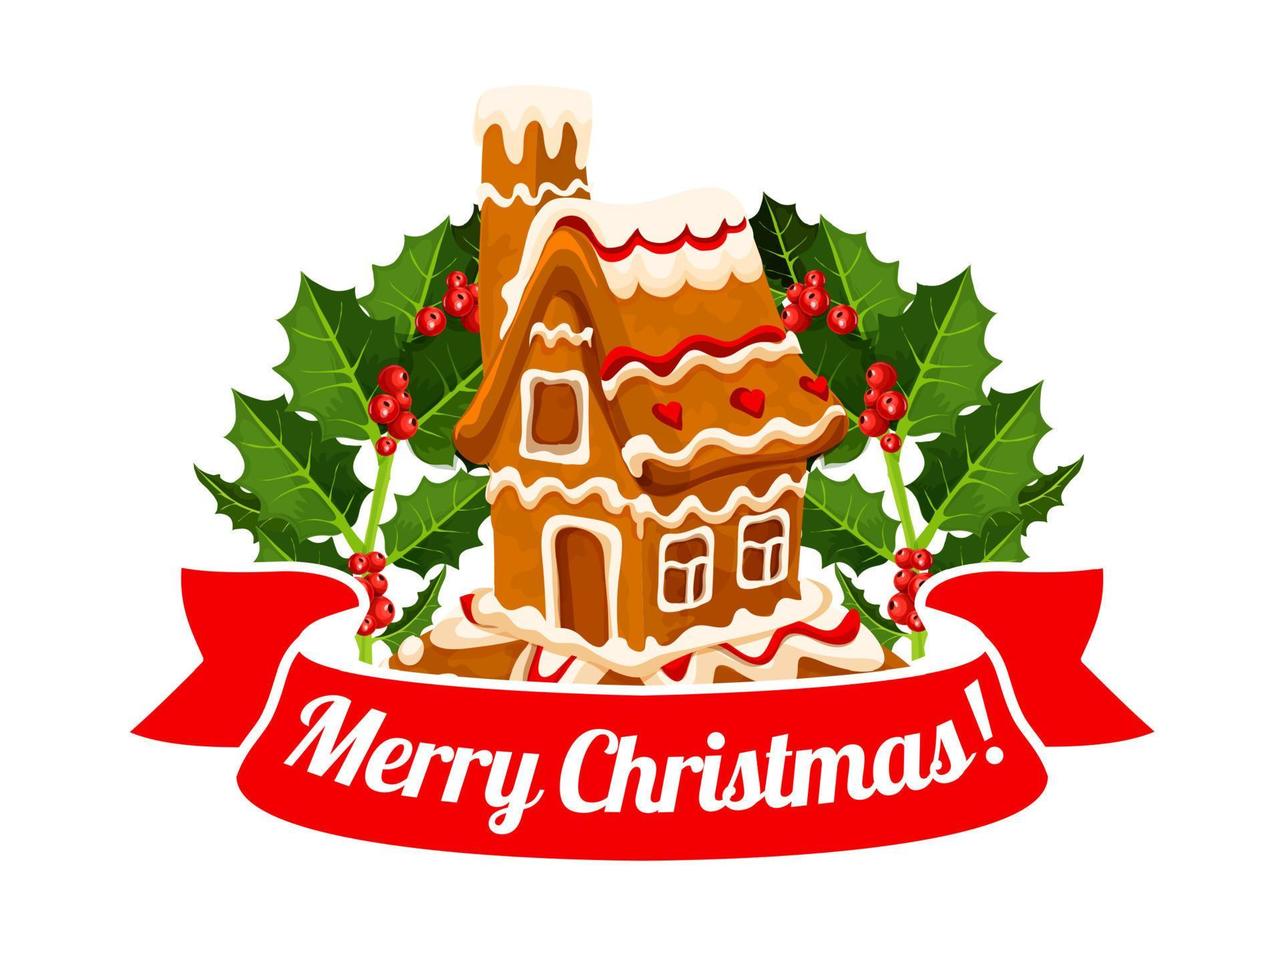 Gingerbread cookie house badge of Christmas design vector